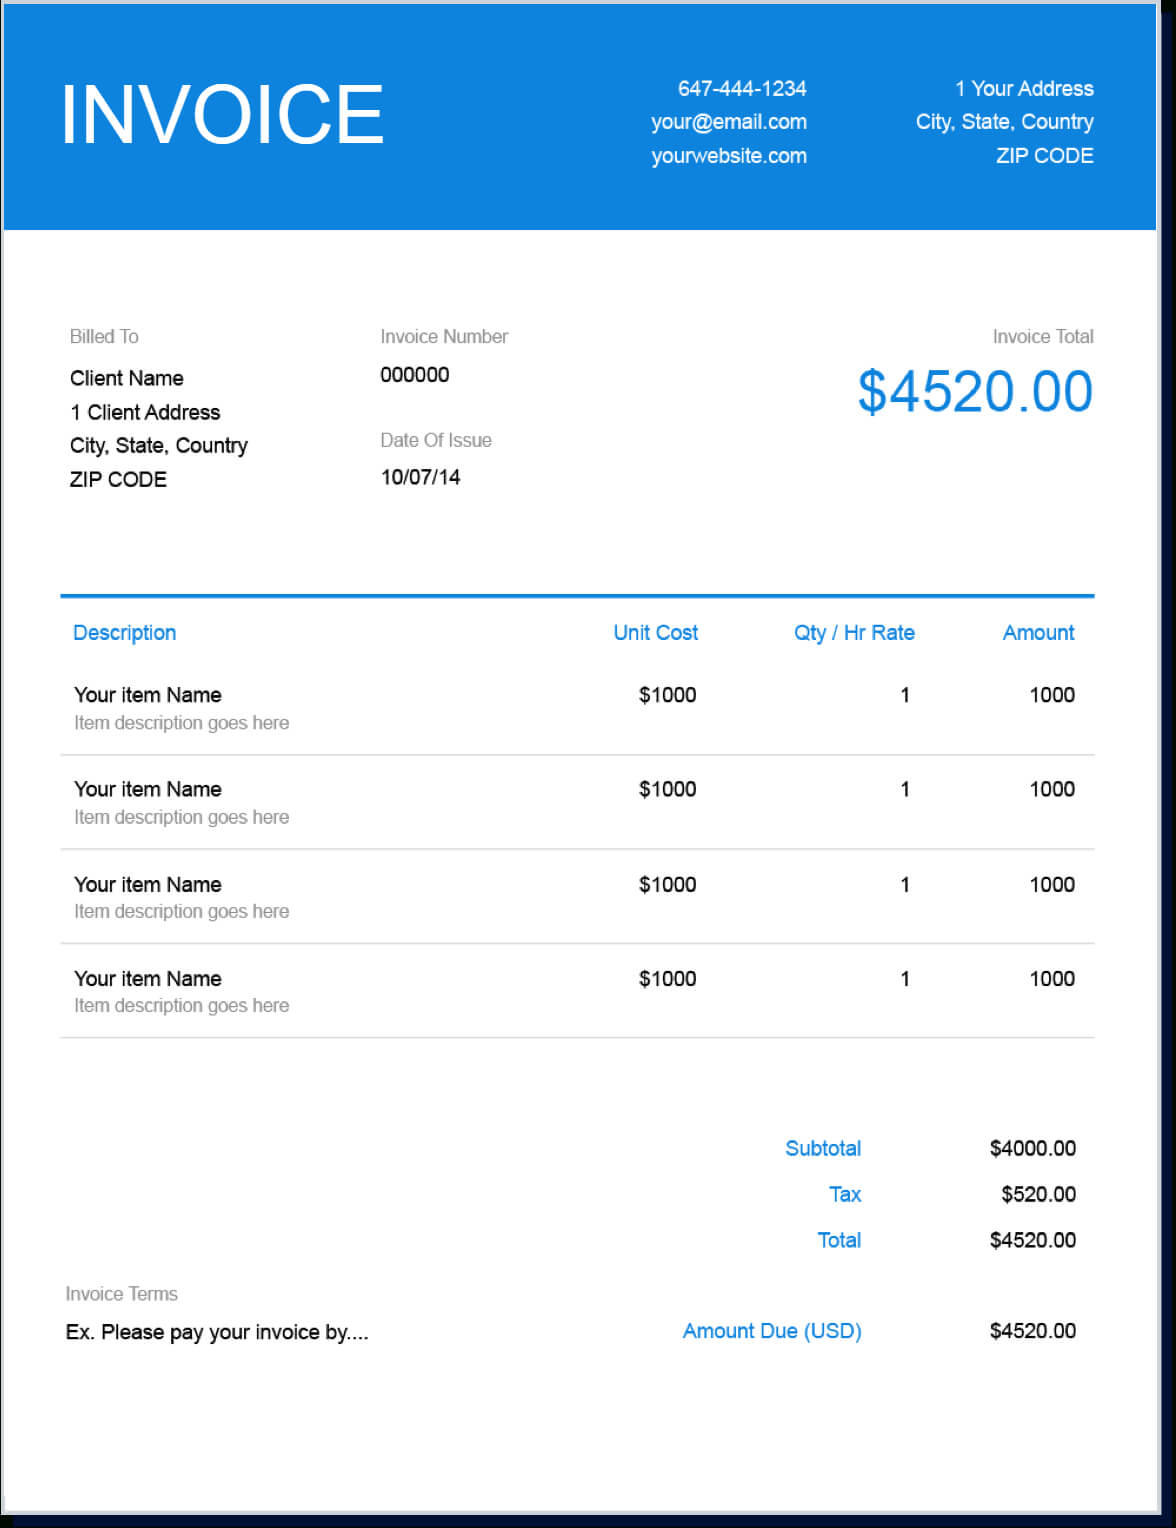 Invoice Template | Create And Send Free Invoices Instantly With Credit Card Size Template For Word